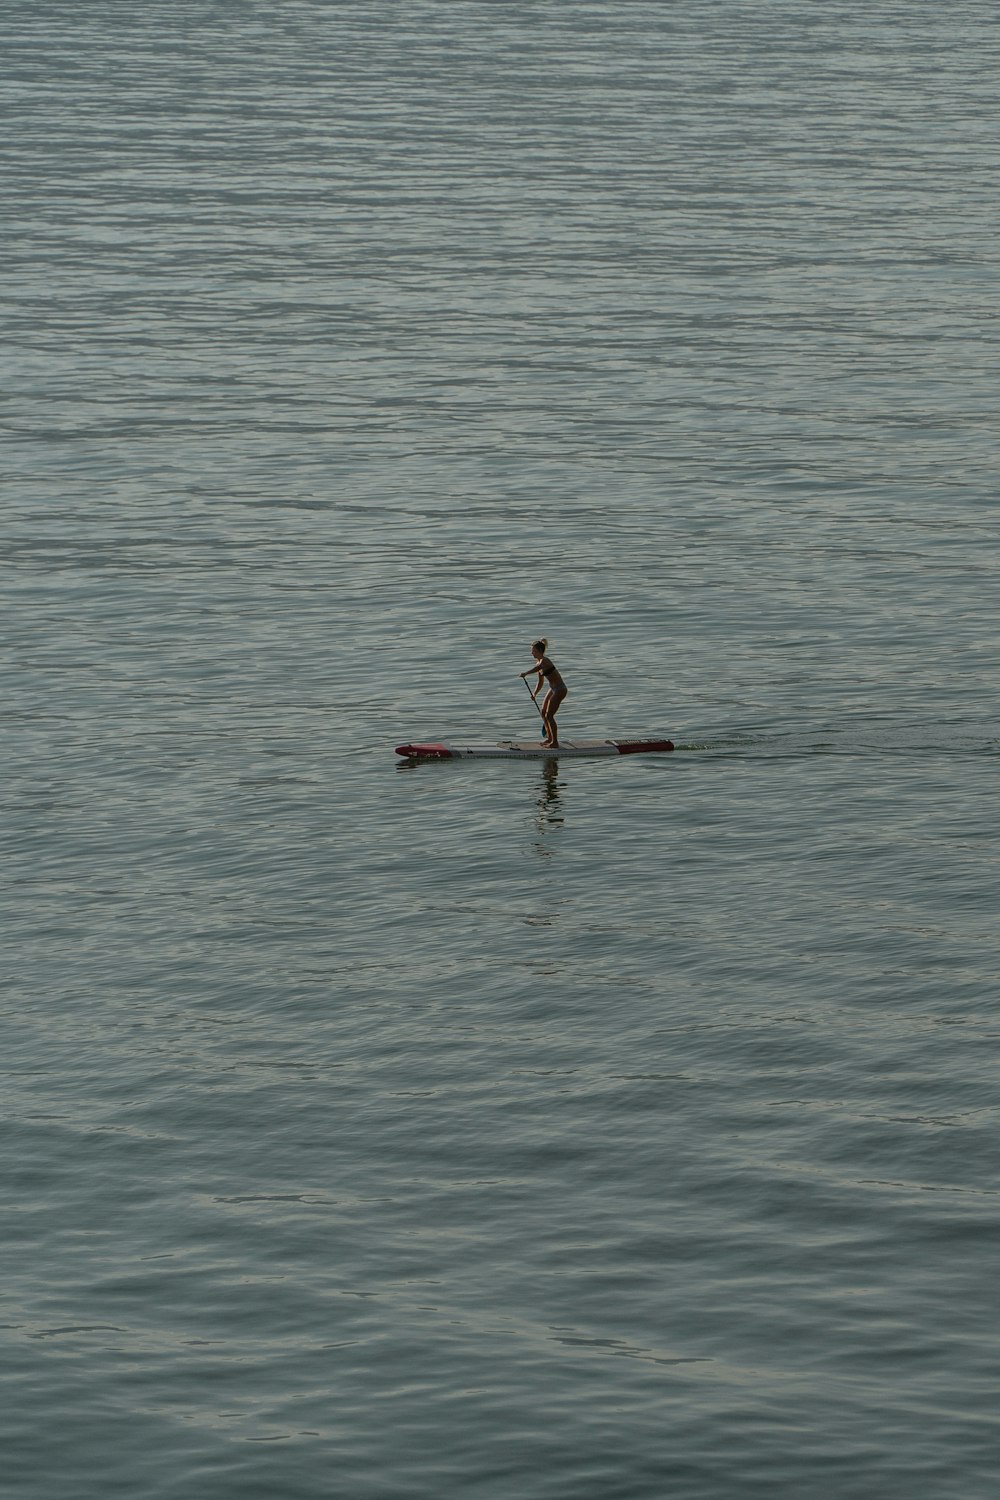 a person riding a paddle boat on a large body of water